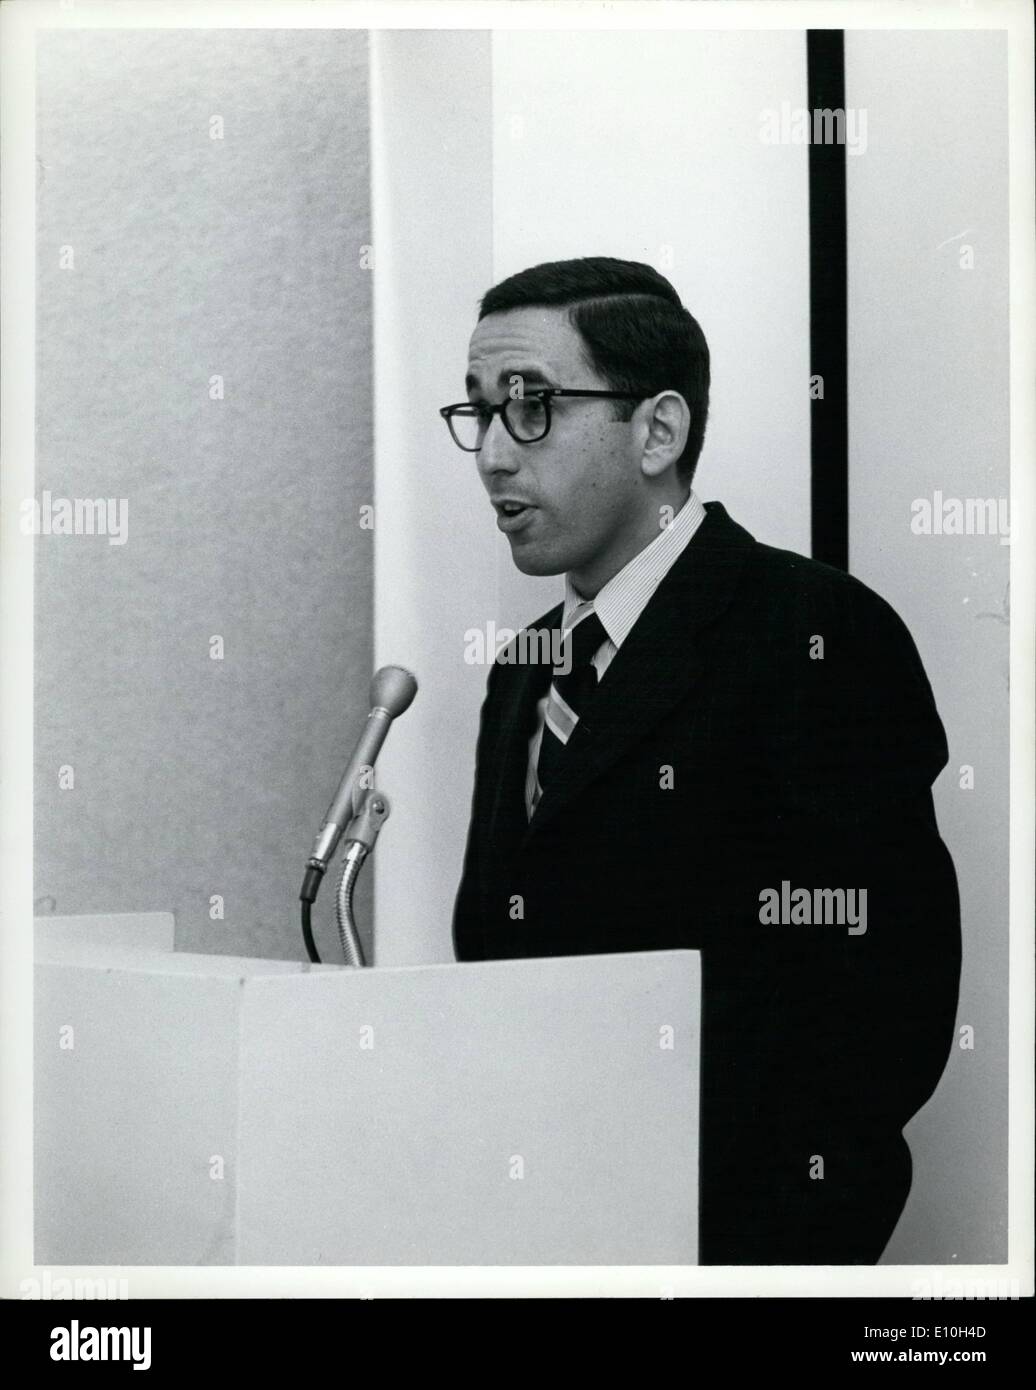 Nov. 11, 1972 - Peter A. derow - u.p. mng Director international additional , Newsweek at press eorence on expansion. Stock Photo